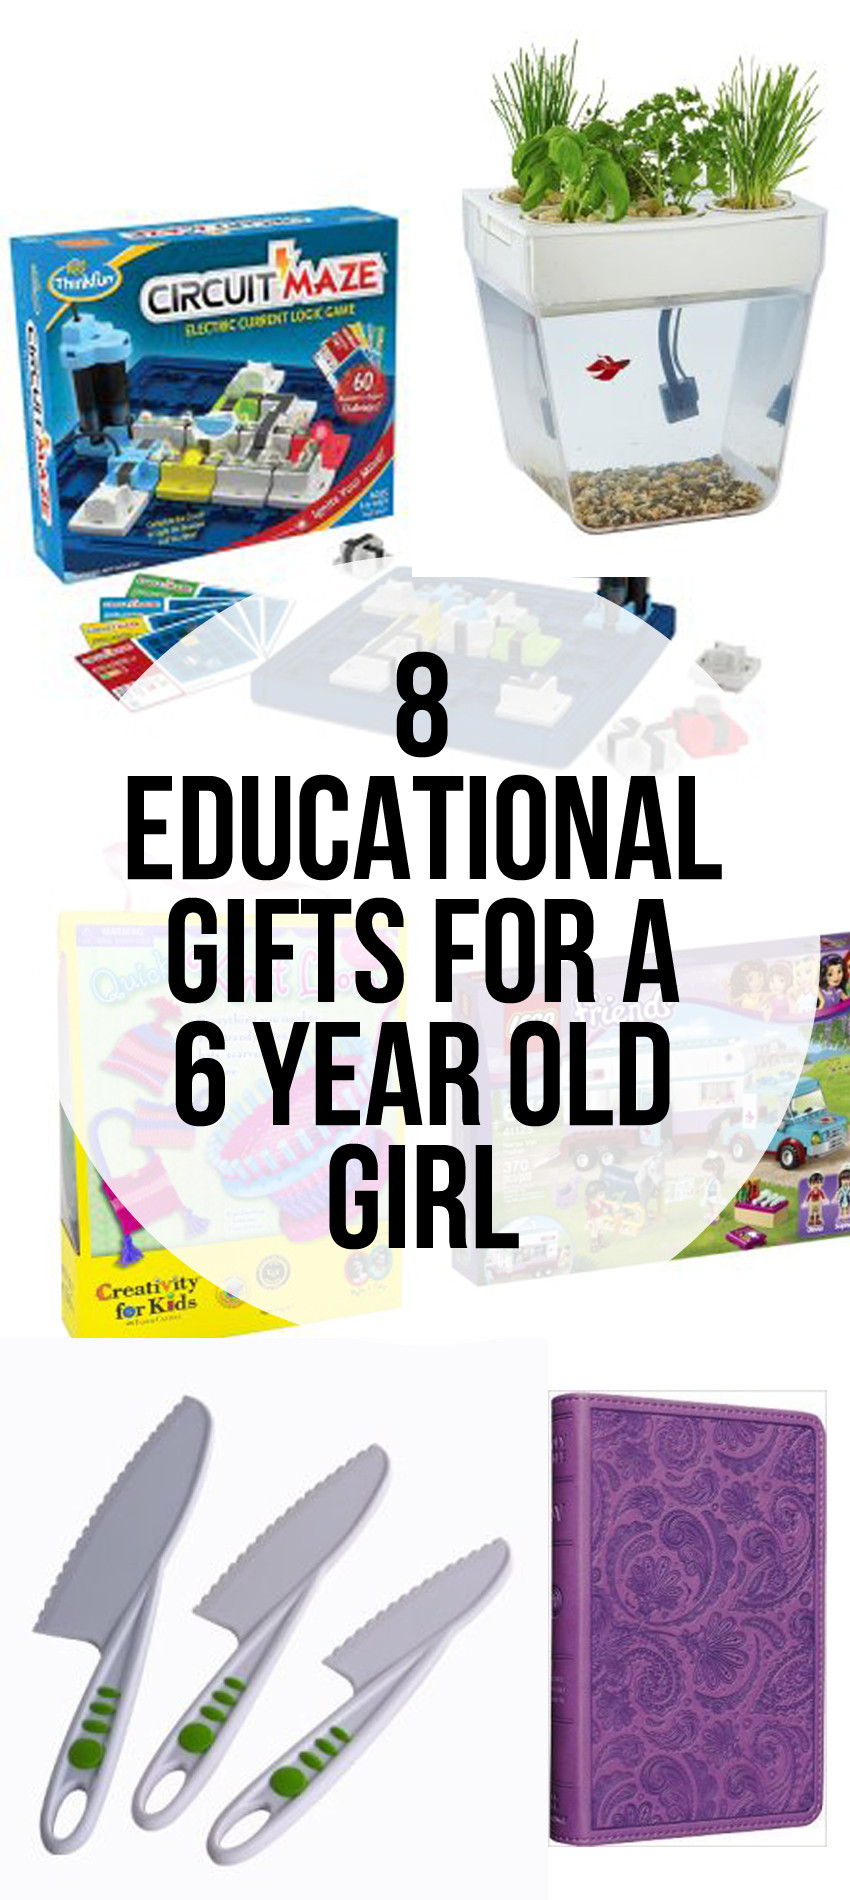 Gift Ideas For 6 Year Old Girls
 8 Educational Gift Ideas for a 6 Year Old Girl